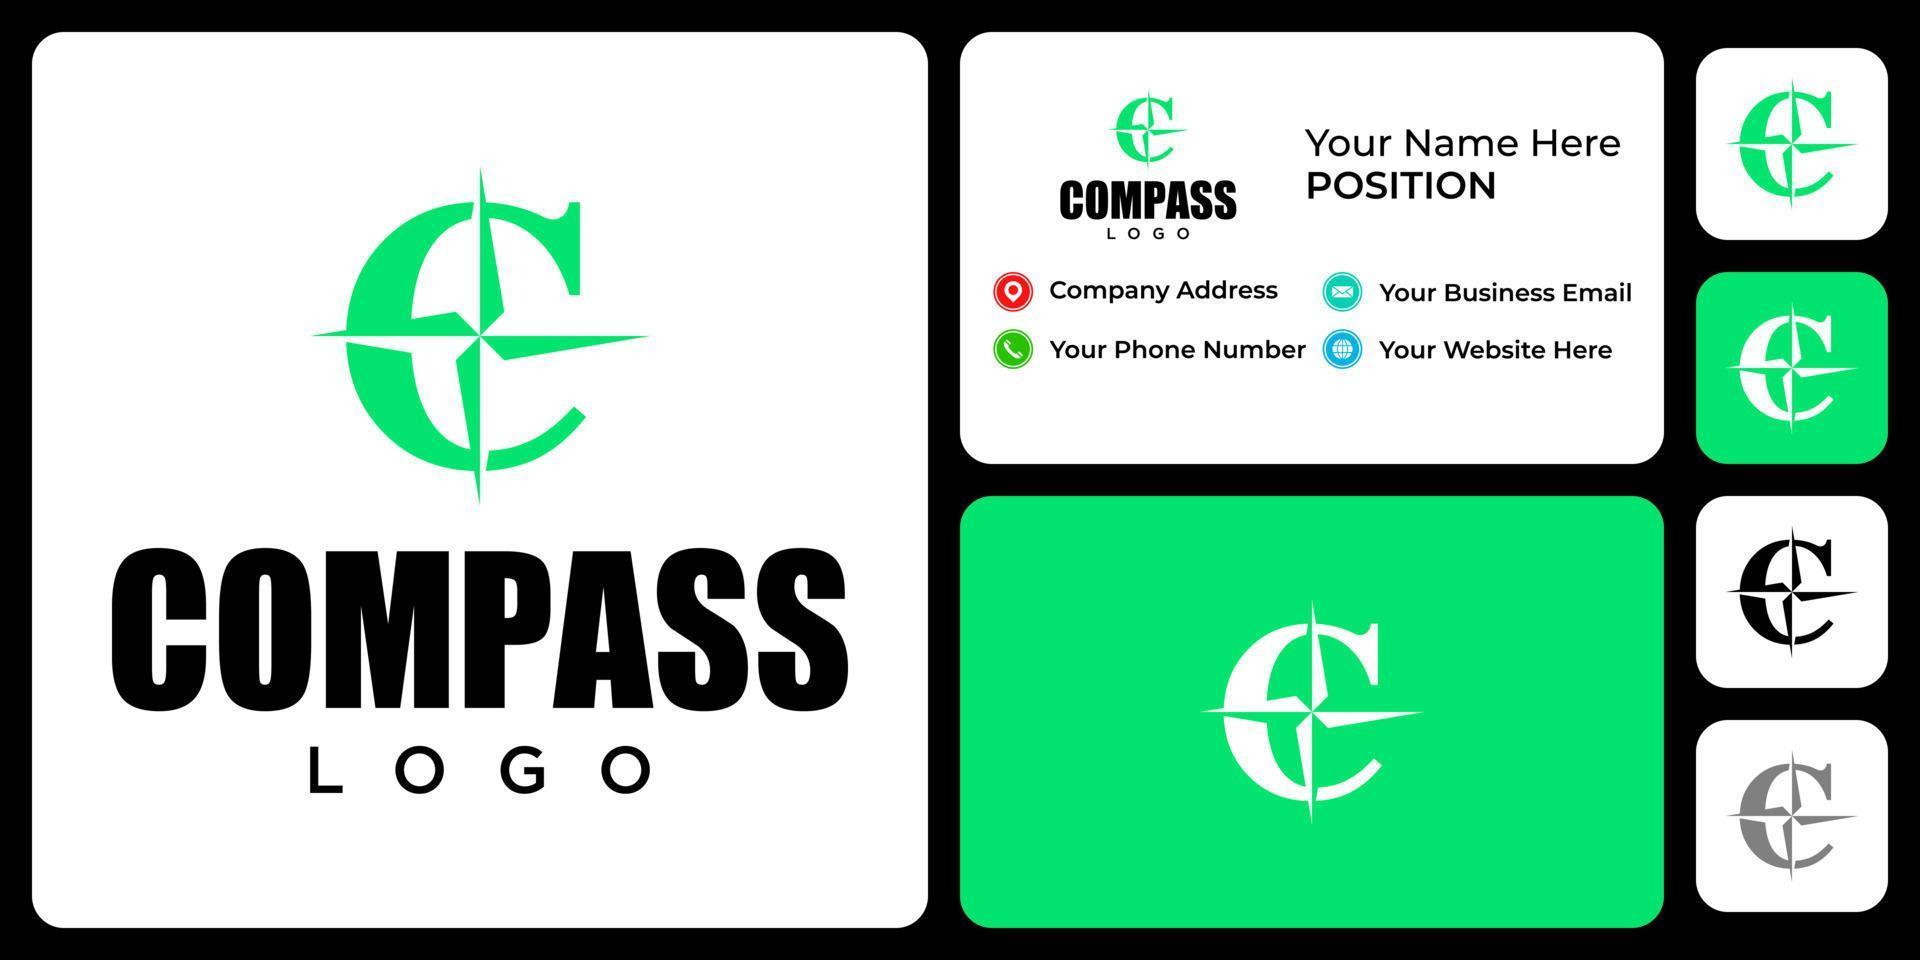 Letter C monogram compass logo design with business card template. vector